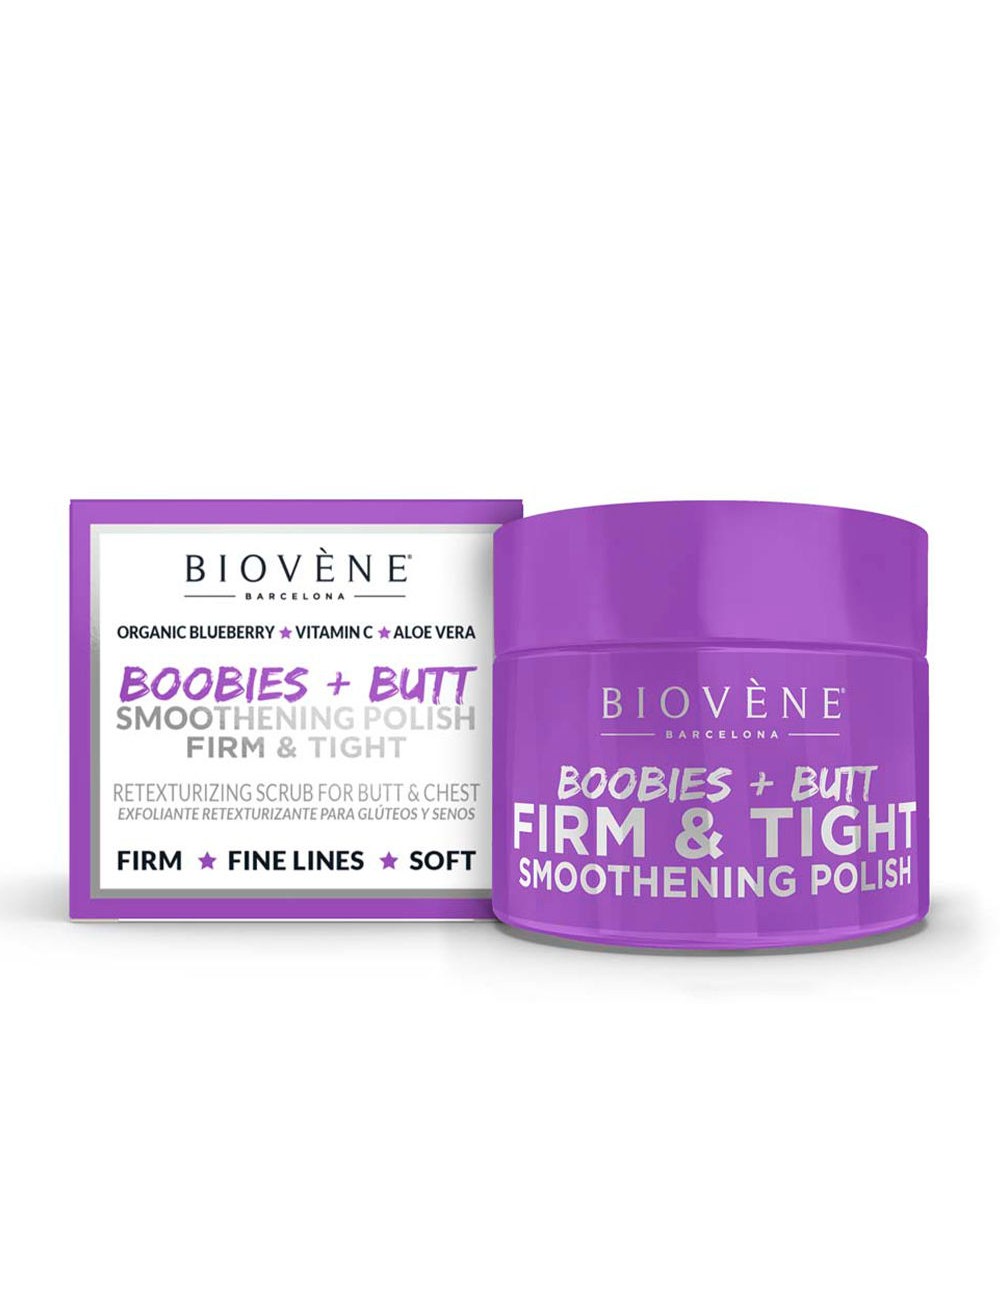 SMOOTHENING POLISH FIRM & TIGHT retexturizing scrub for butt & chest 5